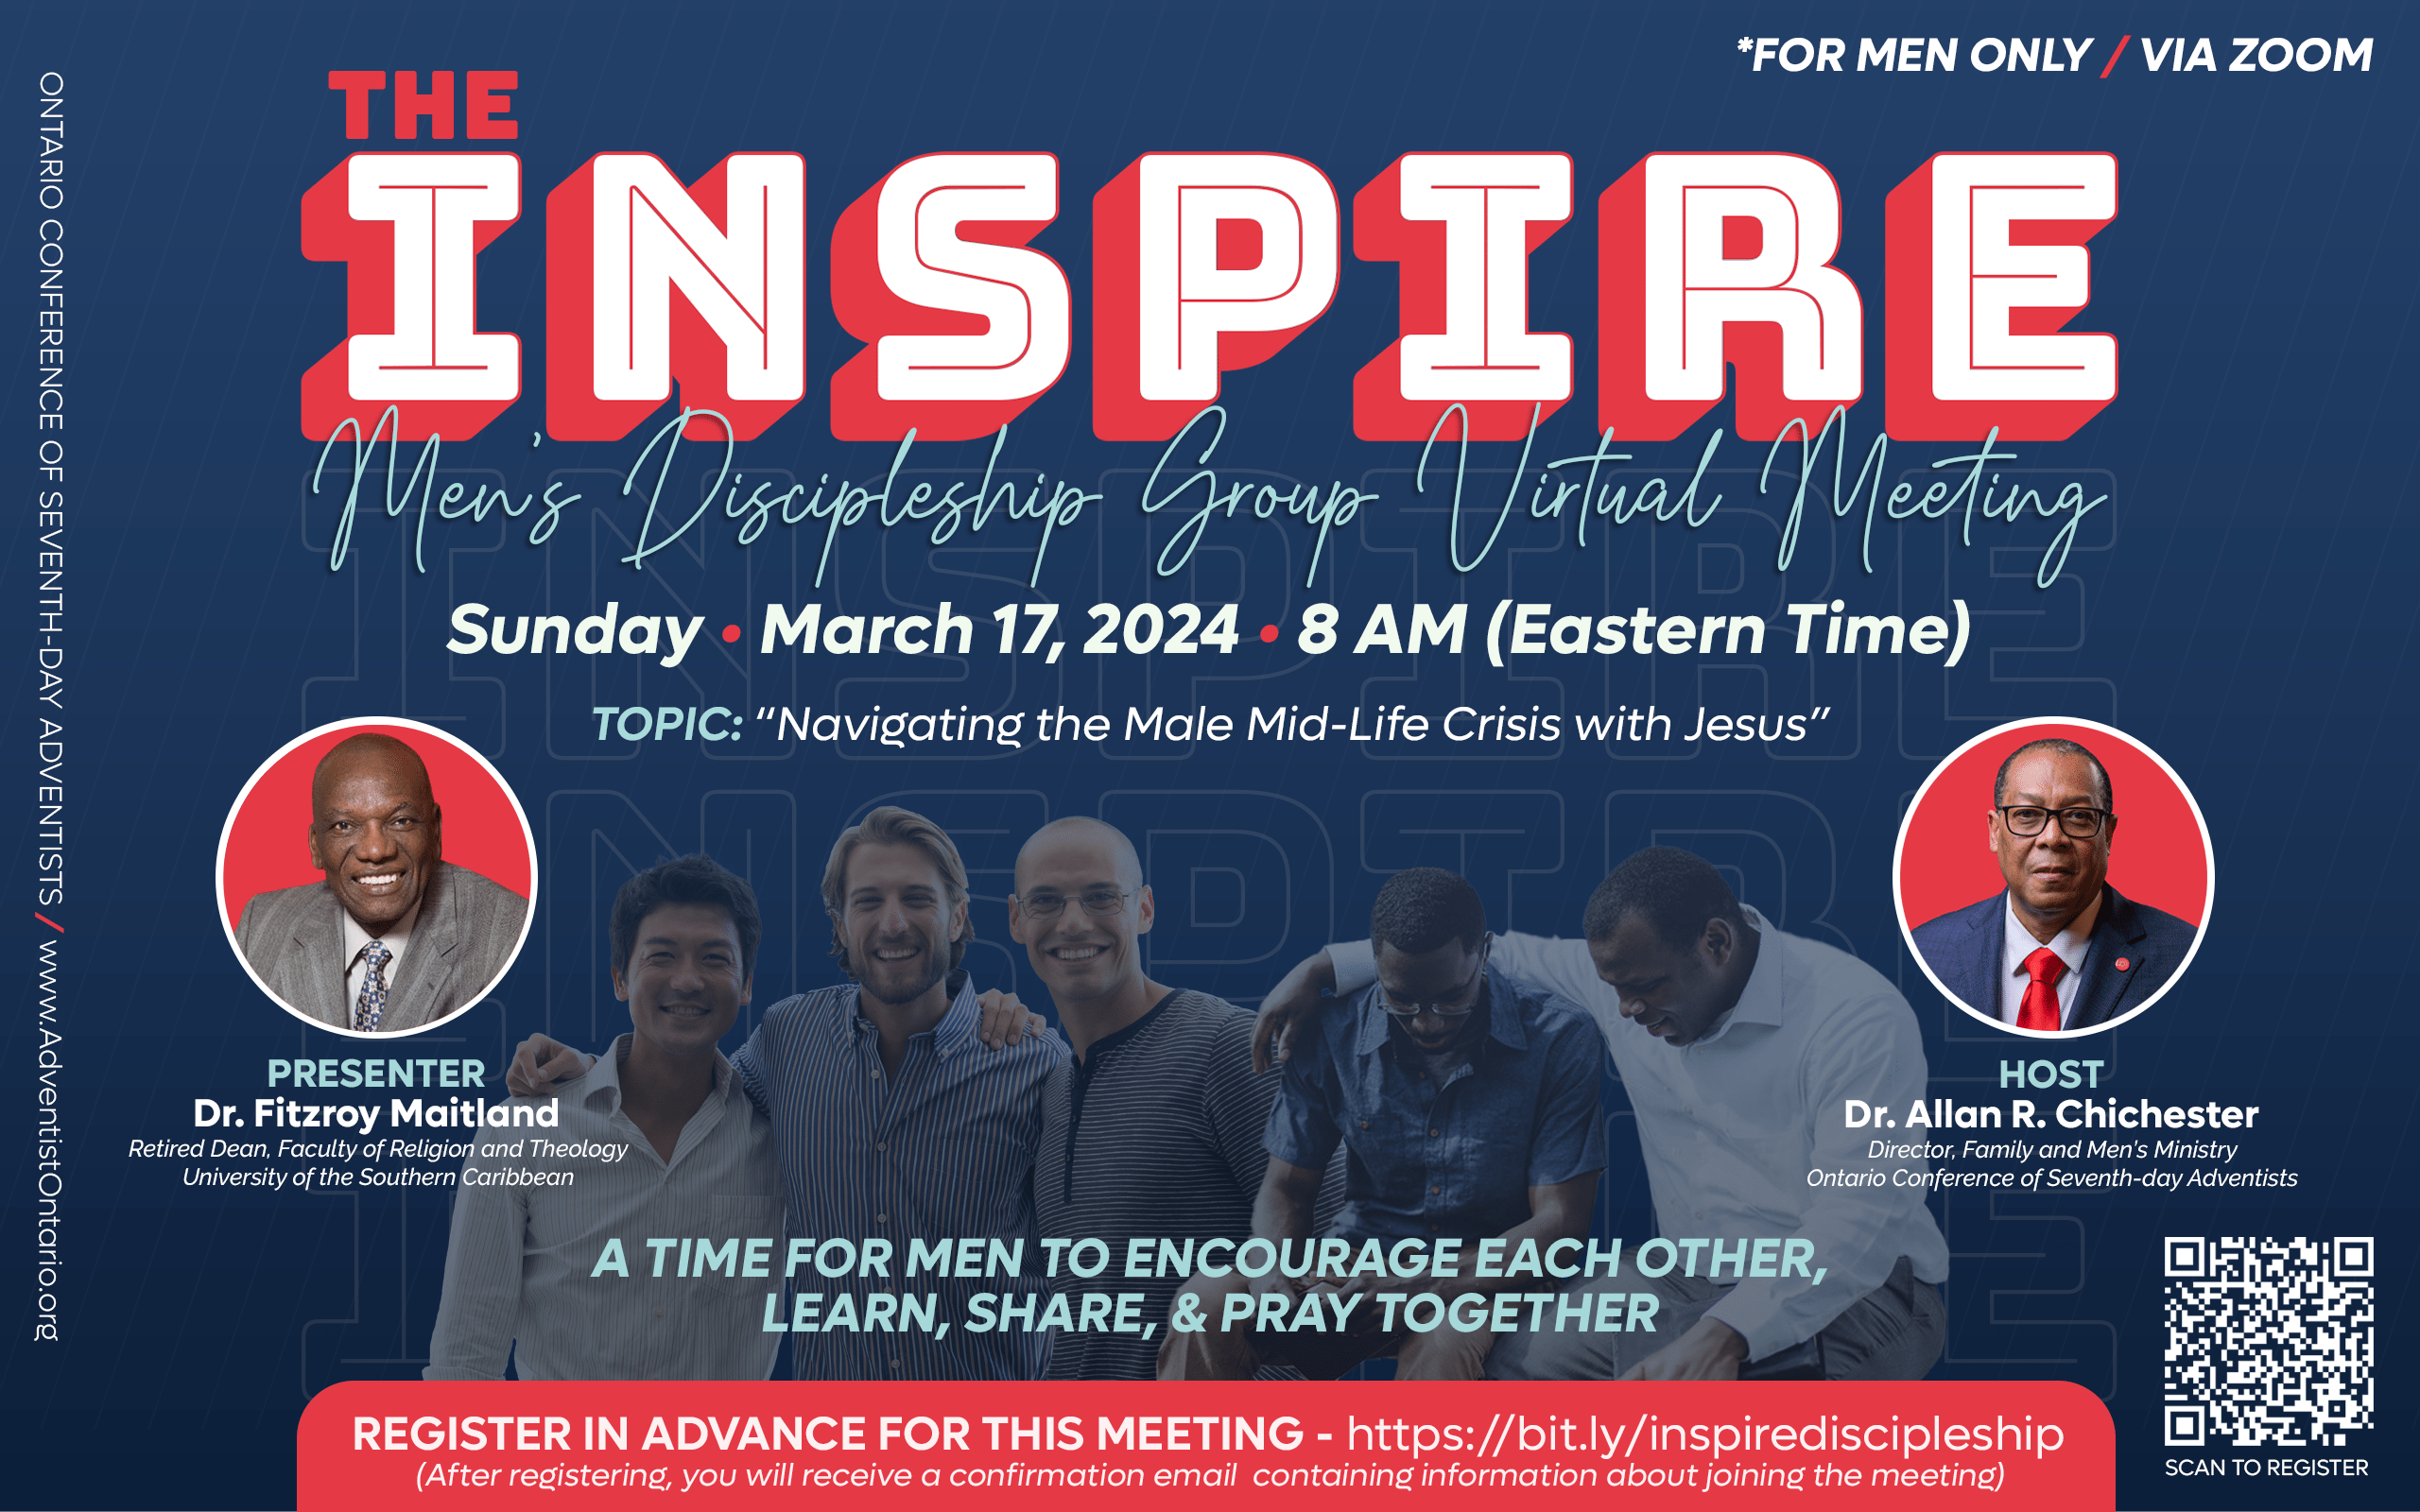 The Inspire Men's Discipleship Group Virtual Meeting - March